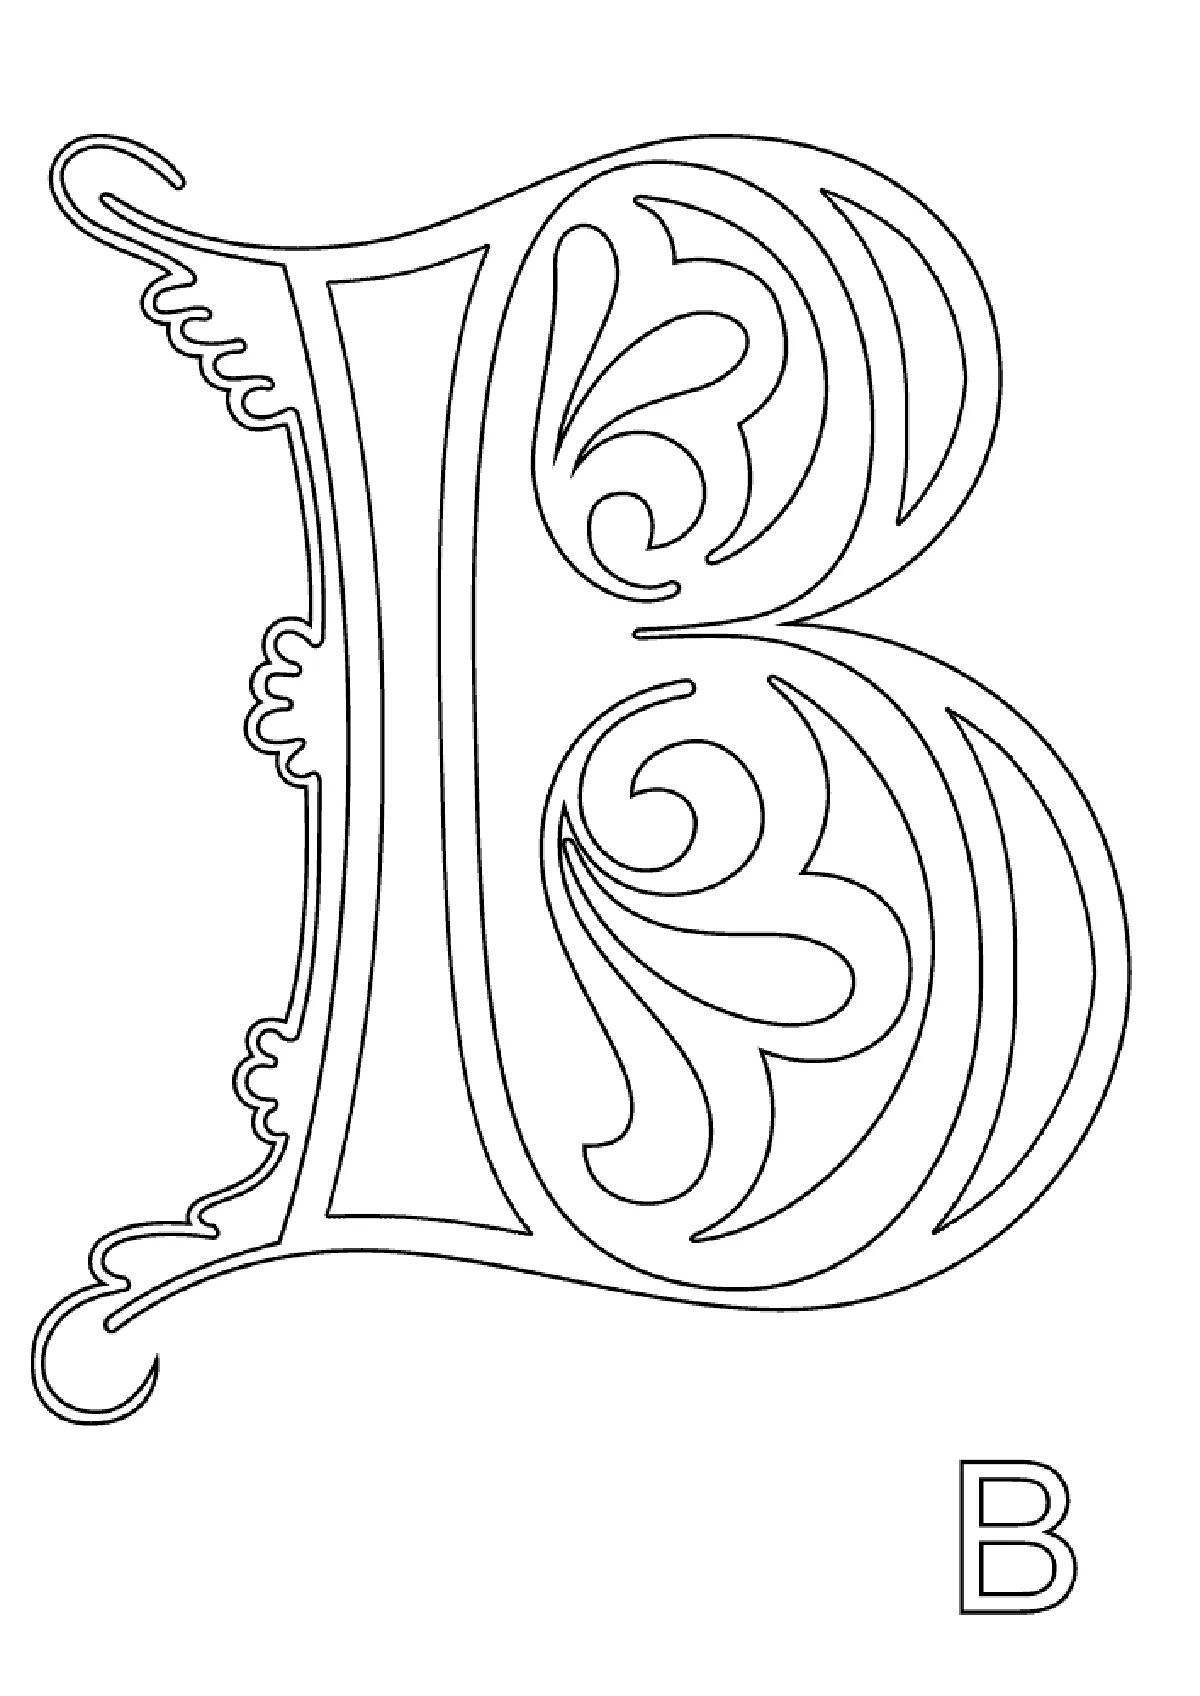 Gorgeous coloring book initial letter slavic